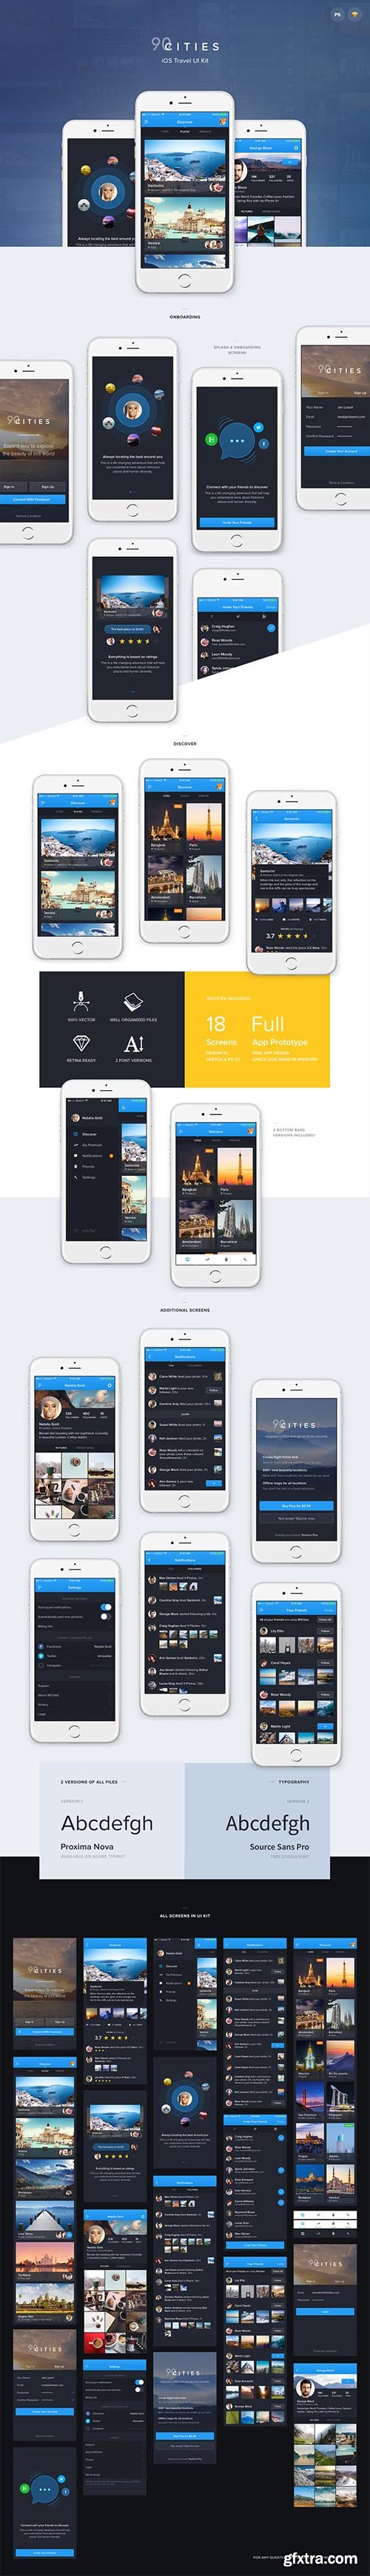 90Cities iOS Kit - Travel Designs for your iOS Designs!